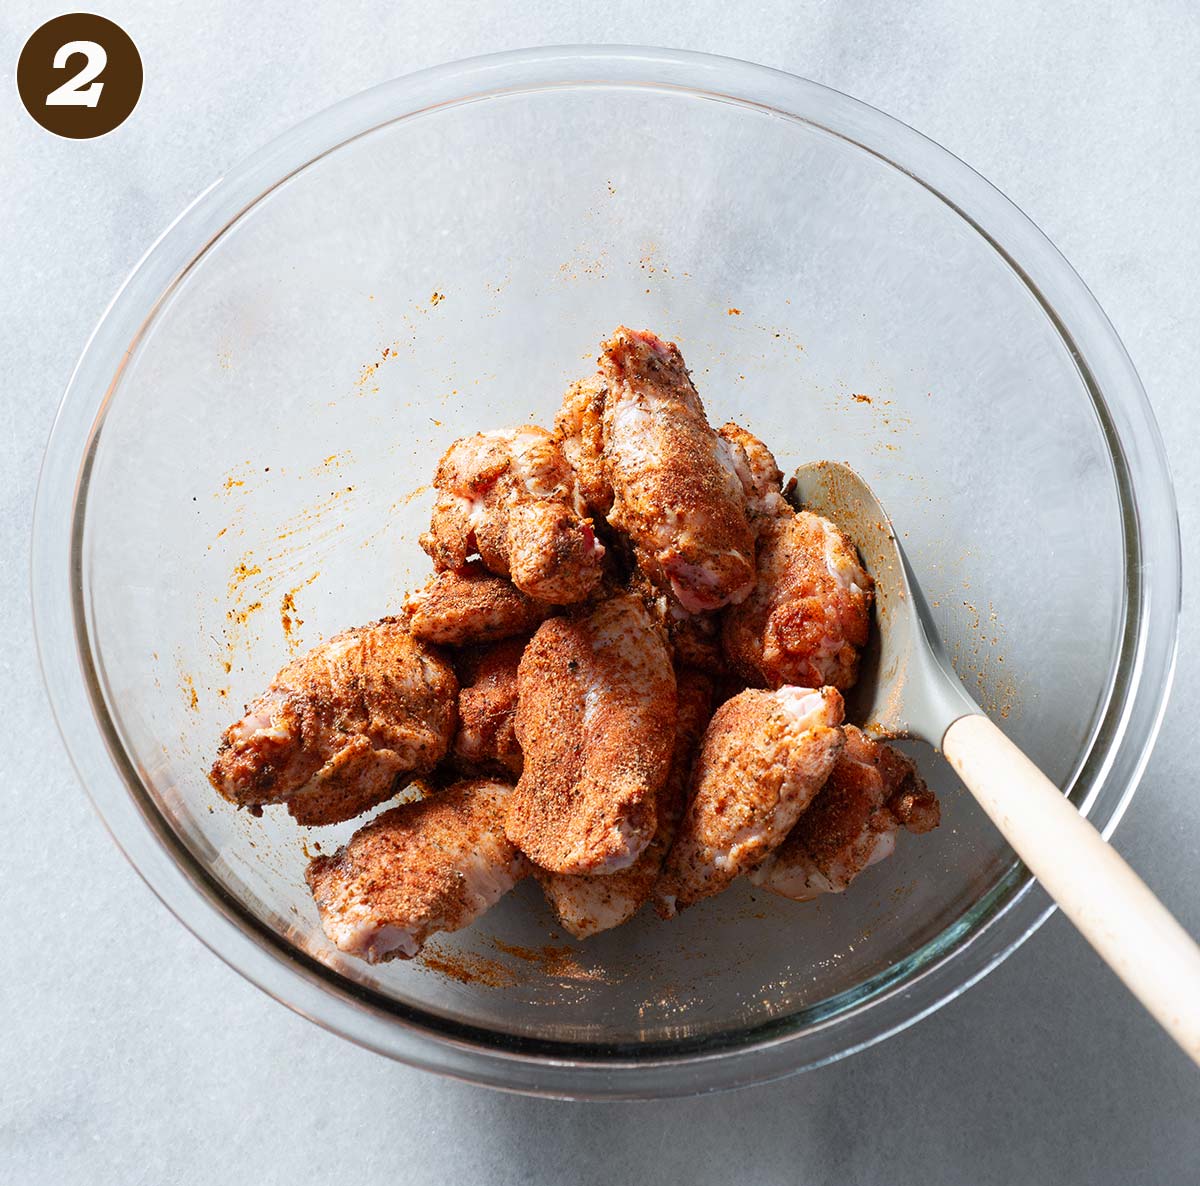 Chicken wings being tossed with seasoning in a bowl.